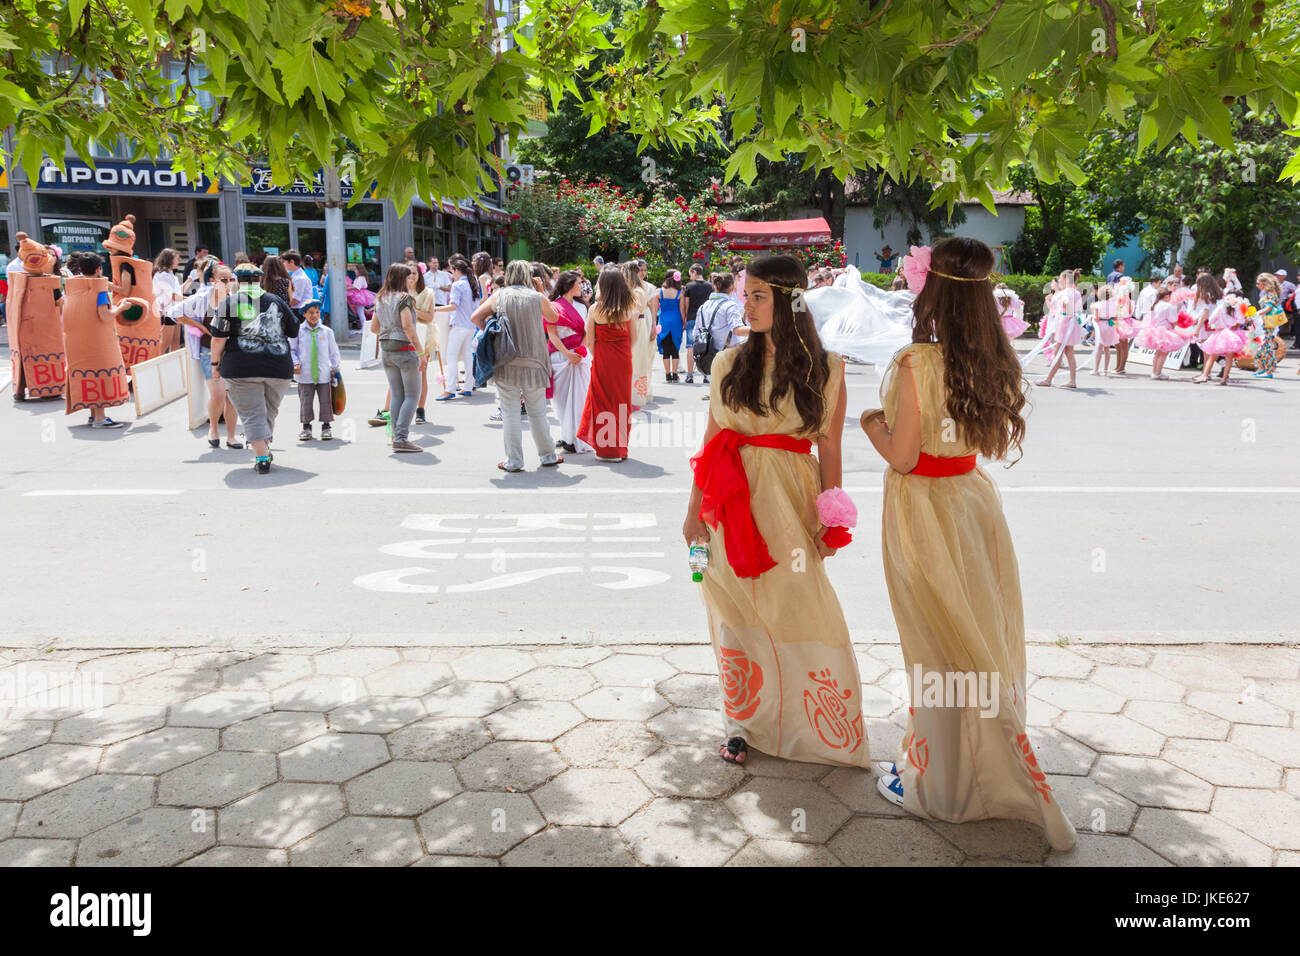 Bulgaria, Central Mountains, Kazanlak, Kazanlak Rose Festival, town produces 60% of the world's rose oil, young woman in the Rose Queen's court, Rose Parade Stock Photo